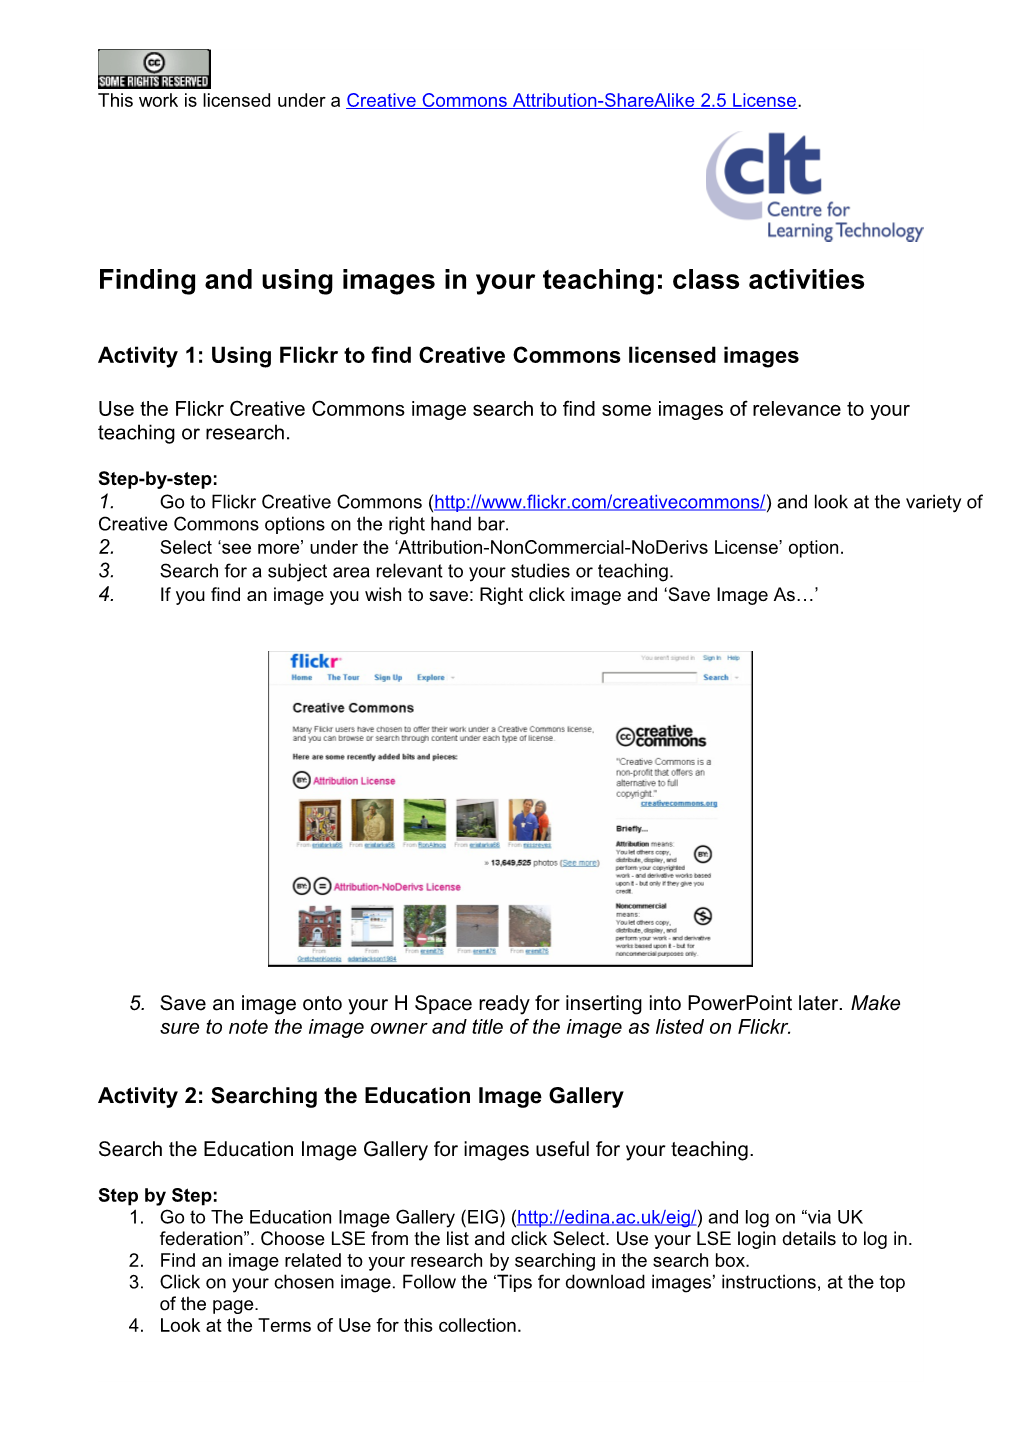 Finding and Using Images in Your Teaching: Worksheet